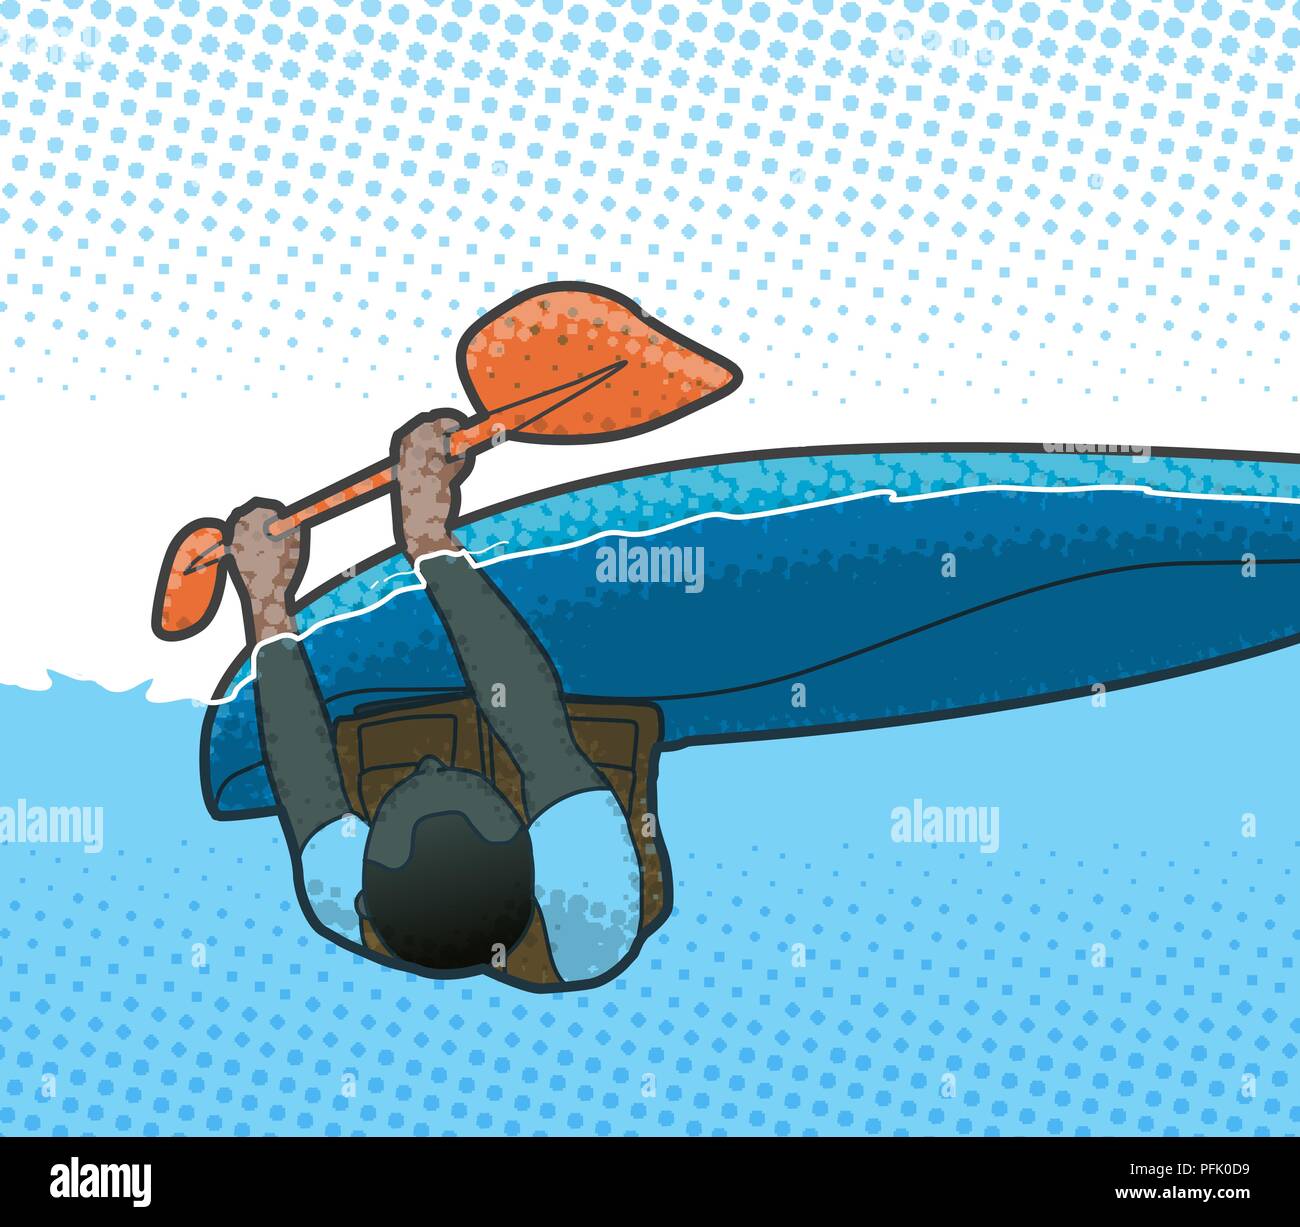 Digital illustration of Eskimo roll with man in upside down position  gripping paddle and resting arms on side of kayak Stock Photo - Alamy